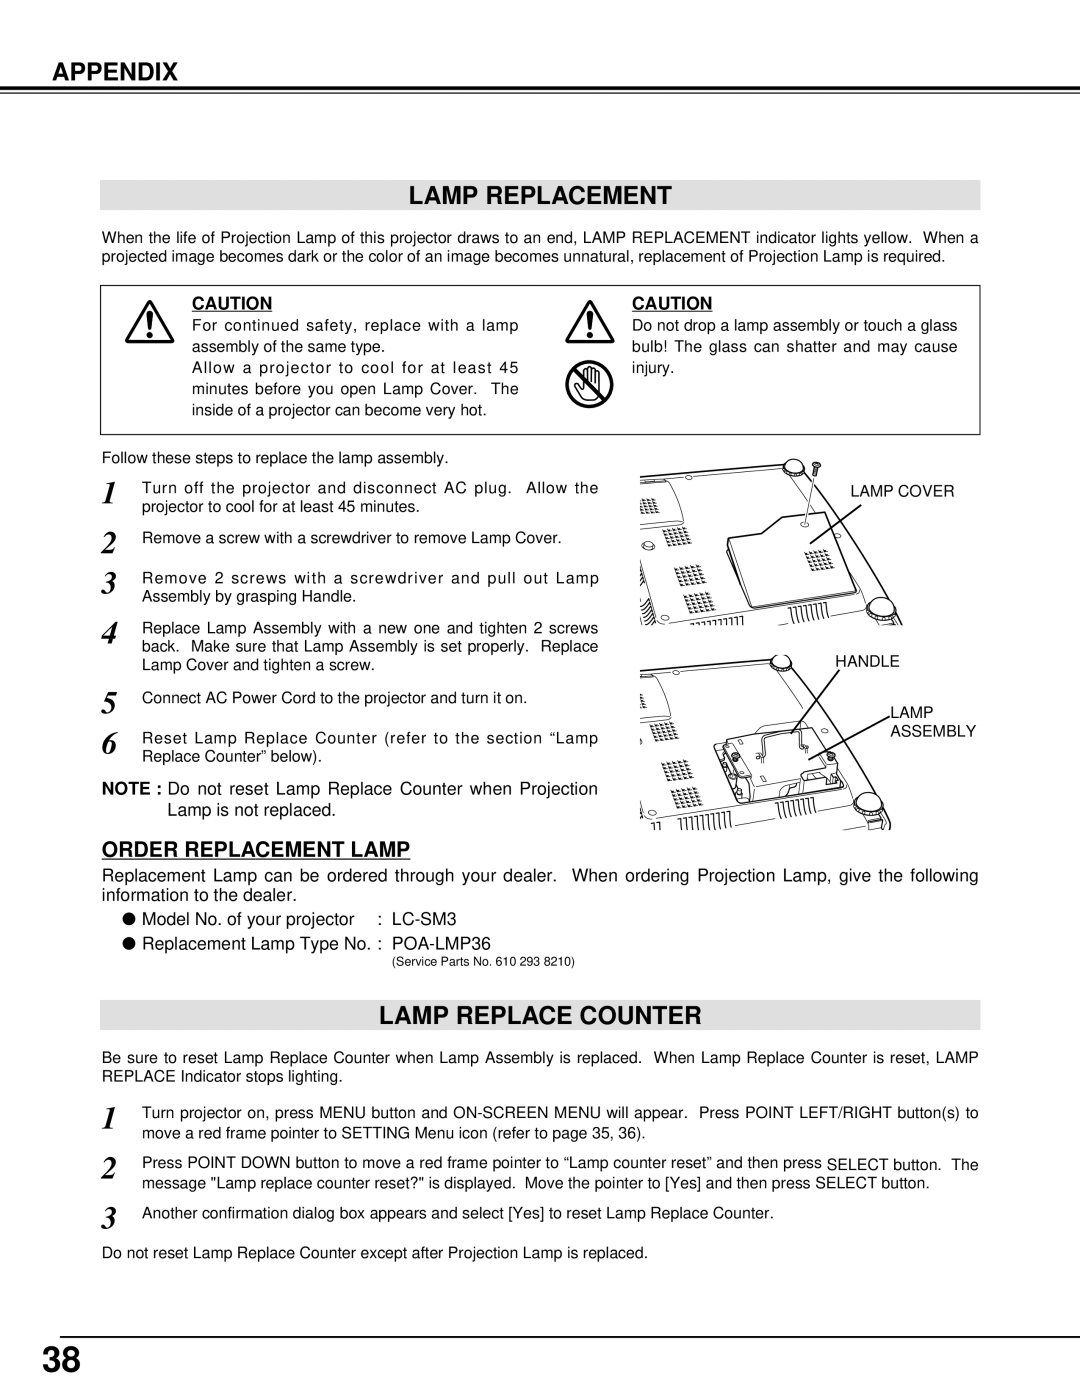 Eiki LC-SM3 owner manual Appendix Lamp Replacement, Lamp Replace Counter 